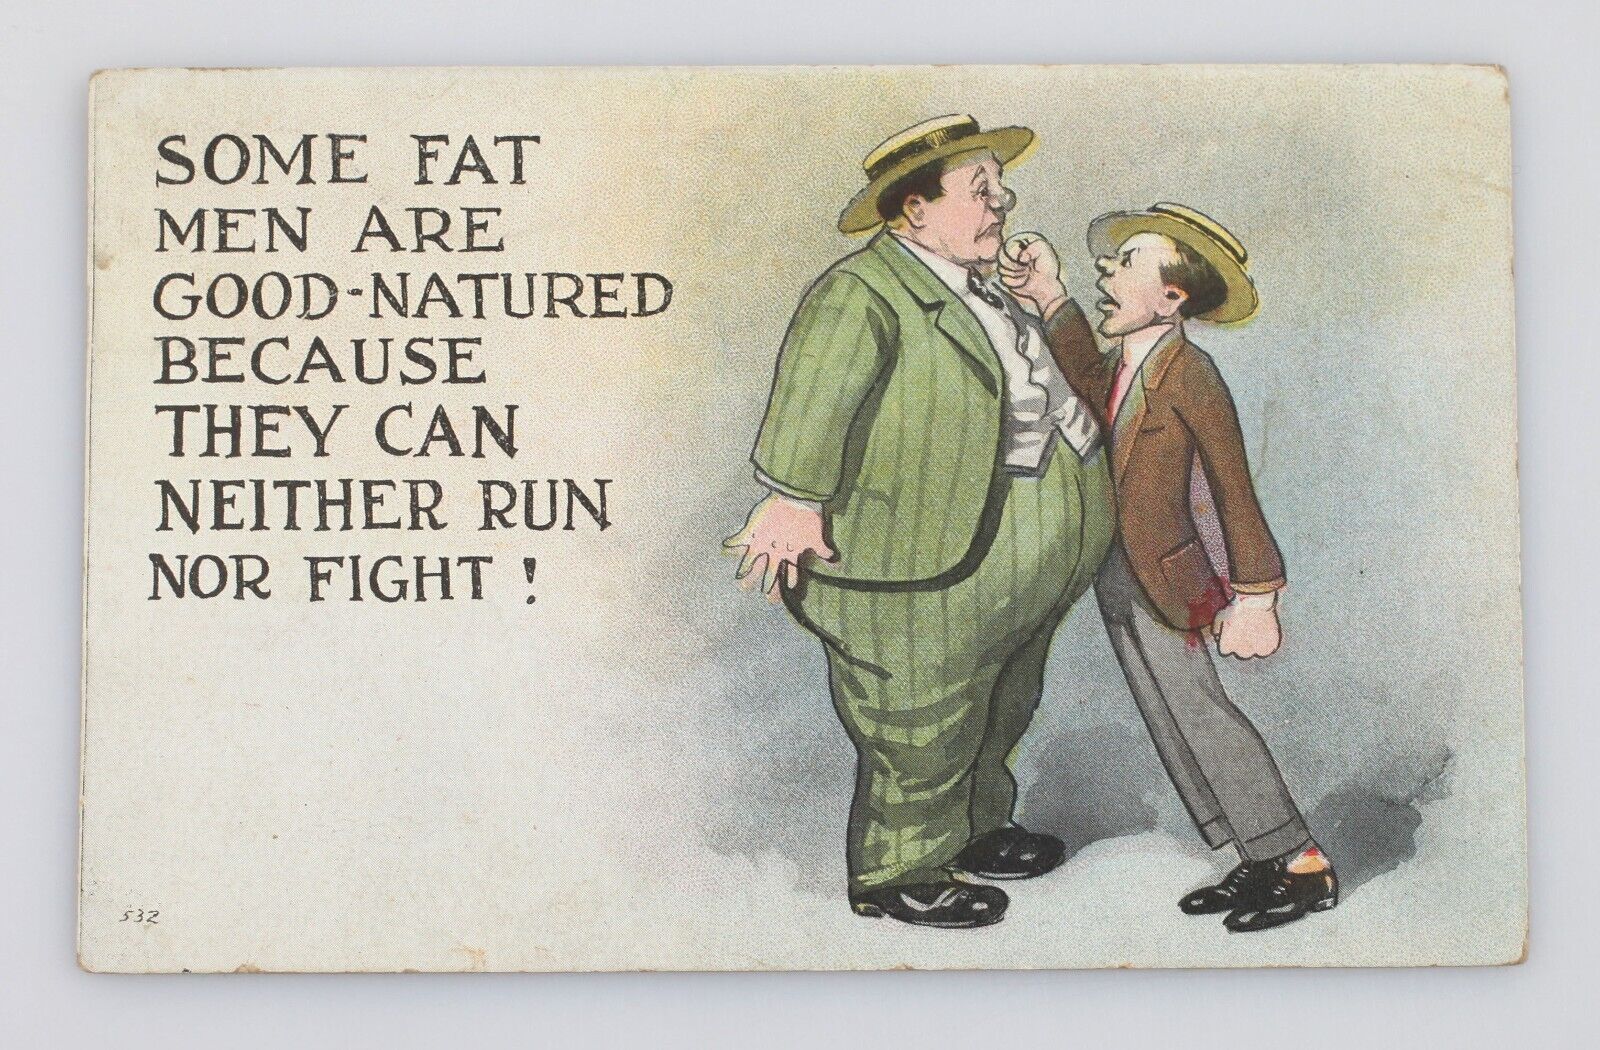 Vintage Postcard 1919 Obesity Good Natured Fat Men Can Neither Run Nor Fight